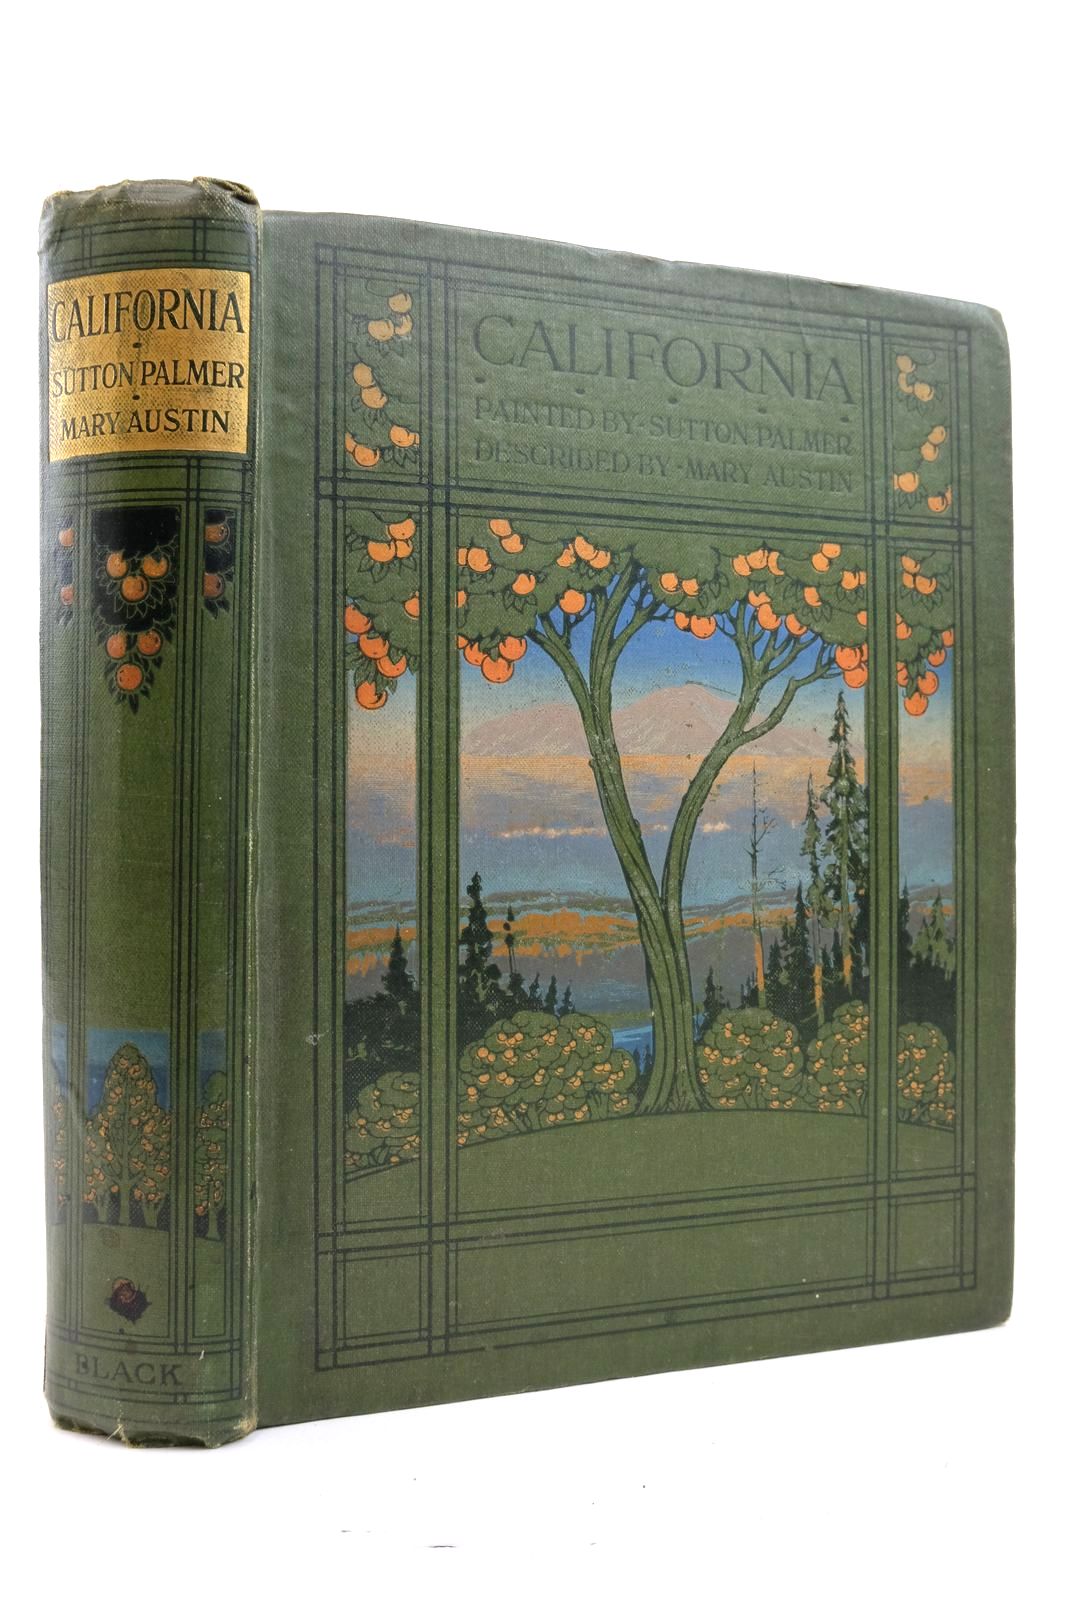 Photo of CALIFORNIA written by Austin, Mary illustrated by Palmer, Sutton published by Adam &amp; Charles Black (STOCK CODE: 2137170)  for sale by Stella & Rose's Books